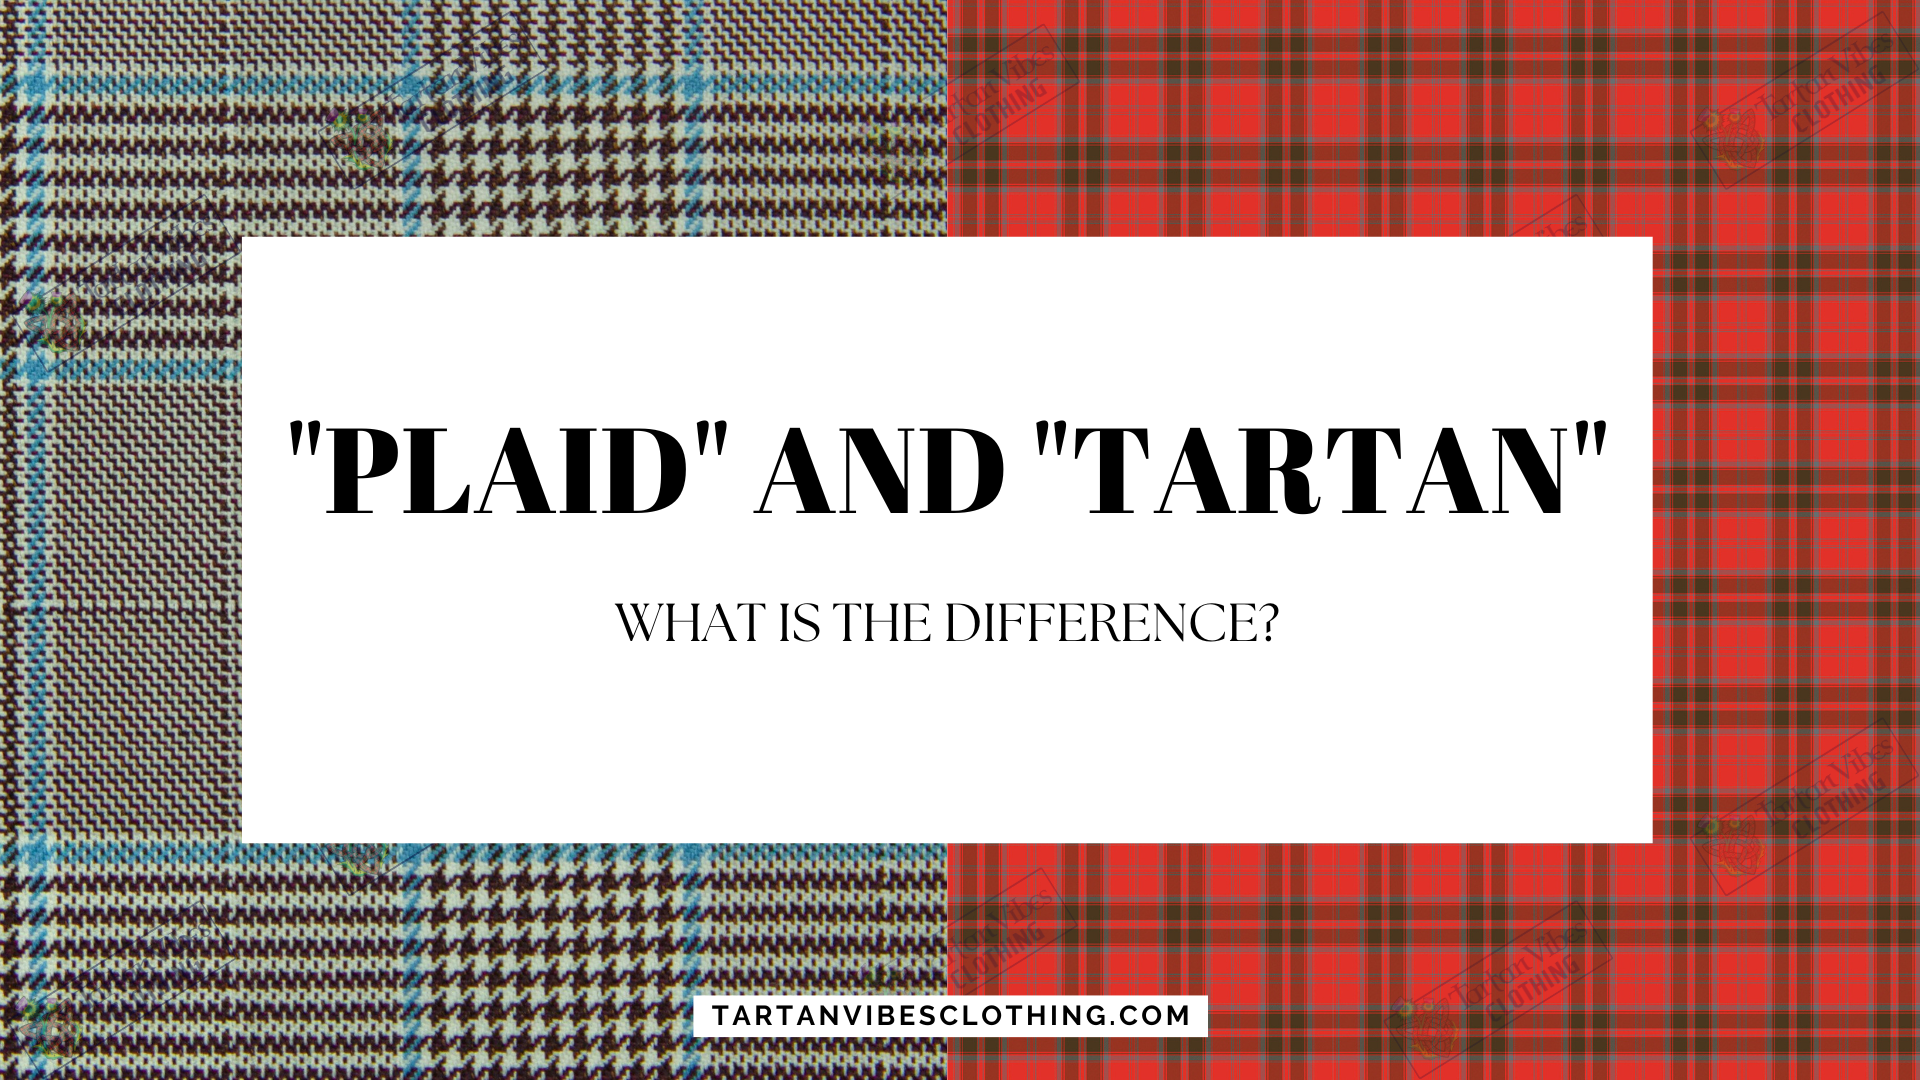 The difference between “Plaid” and “Tartan